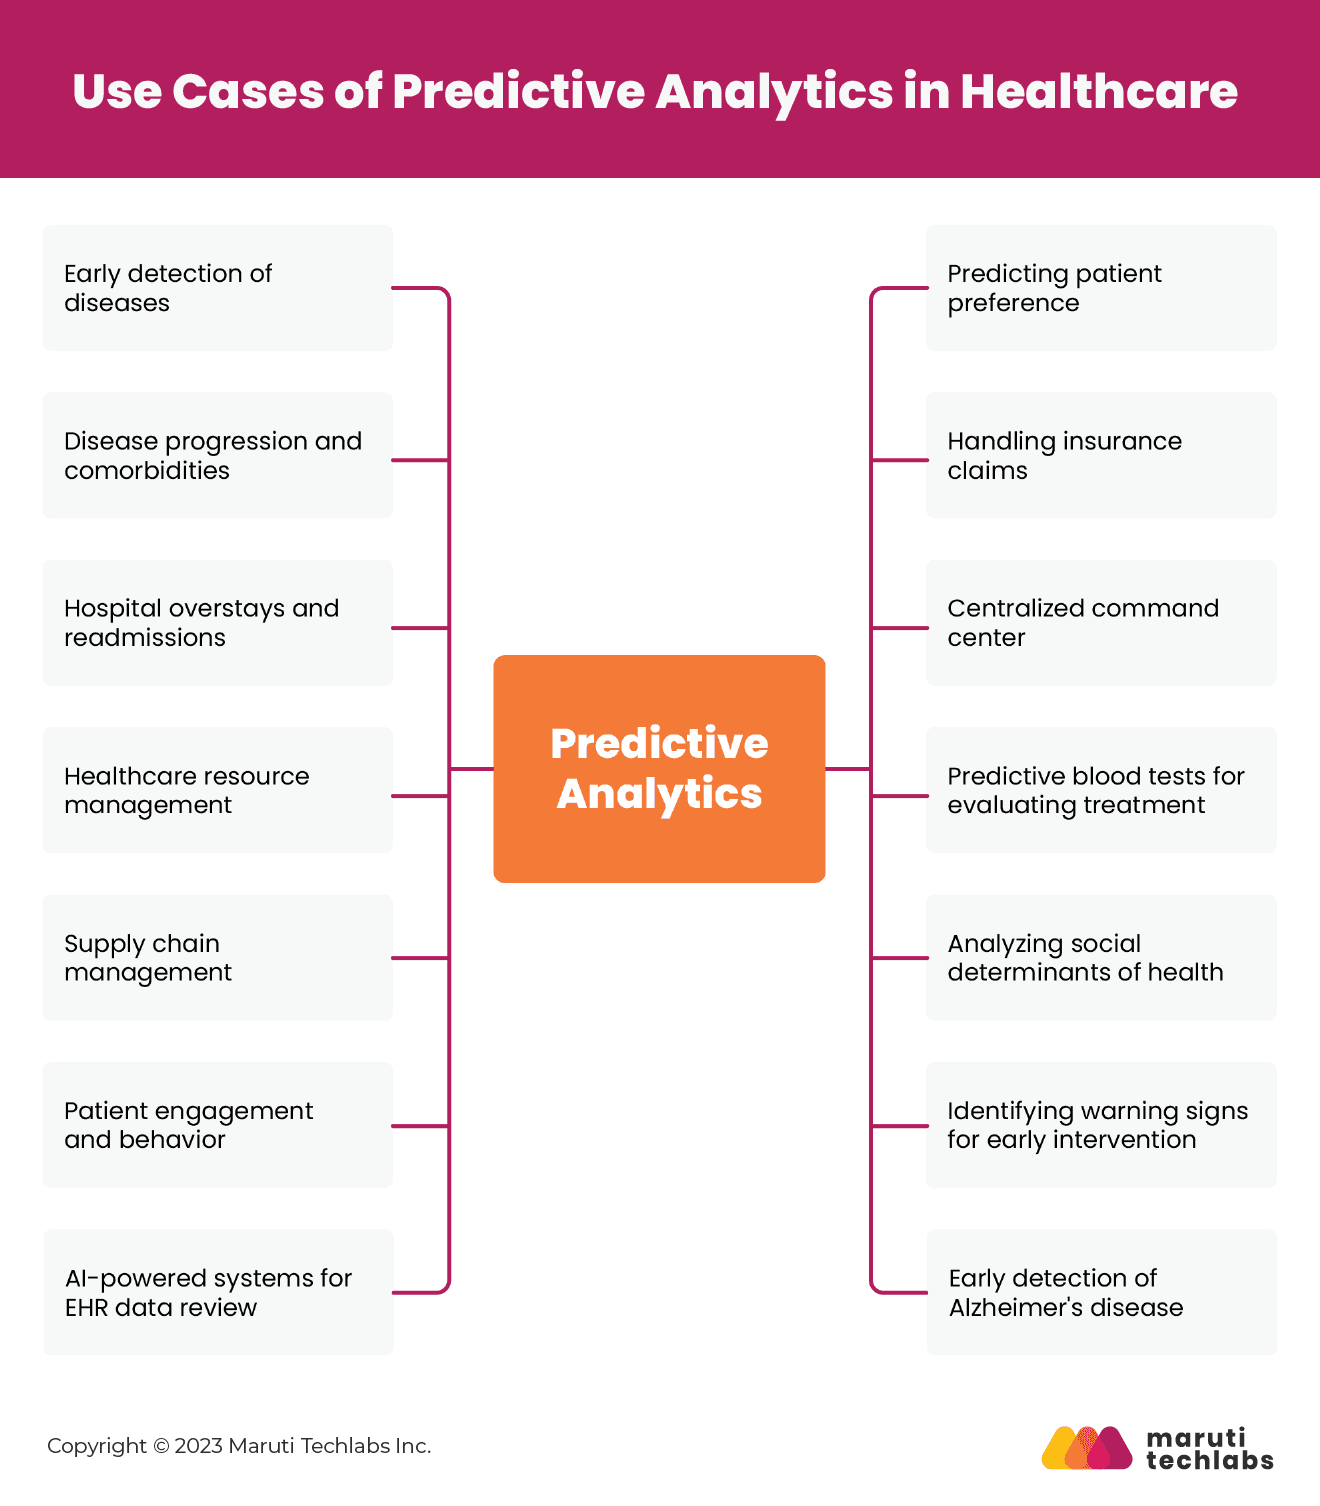 Use Cases for Predictive Analytics in Healthcare